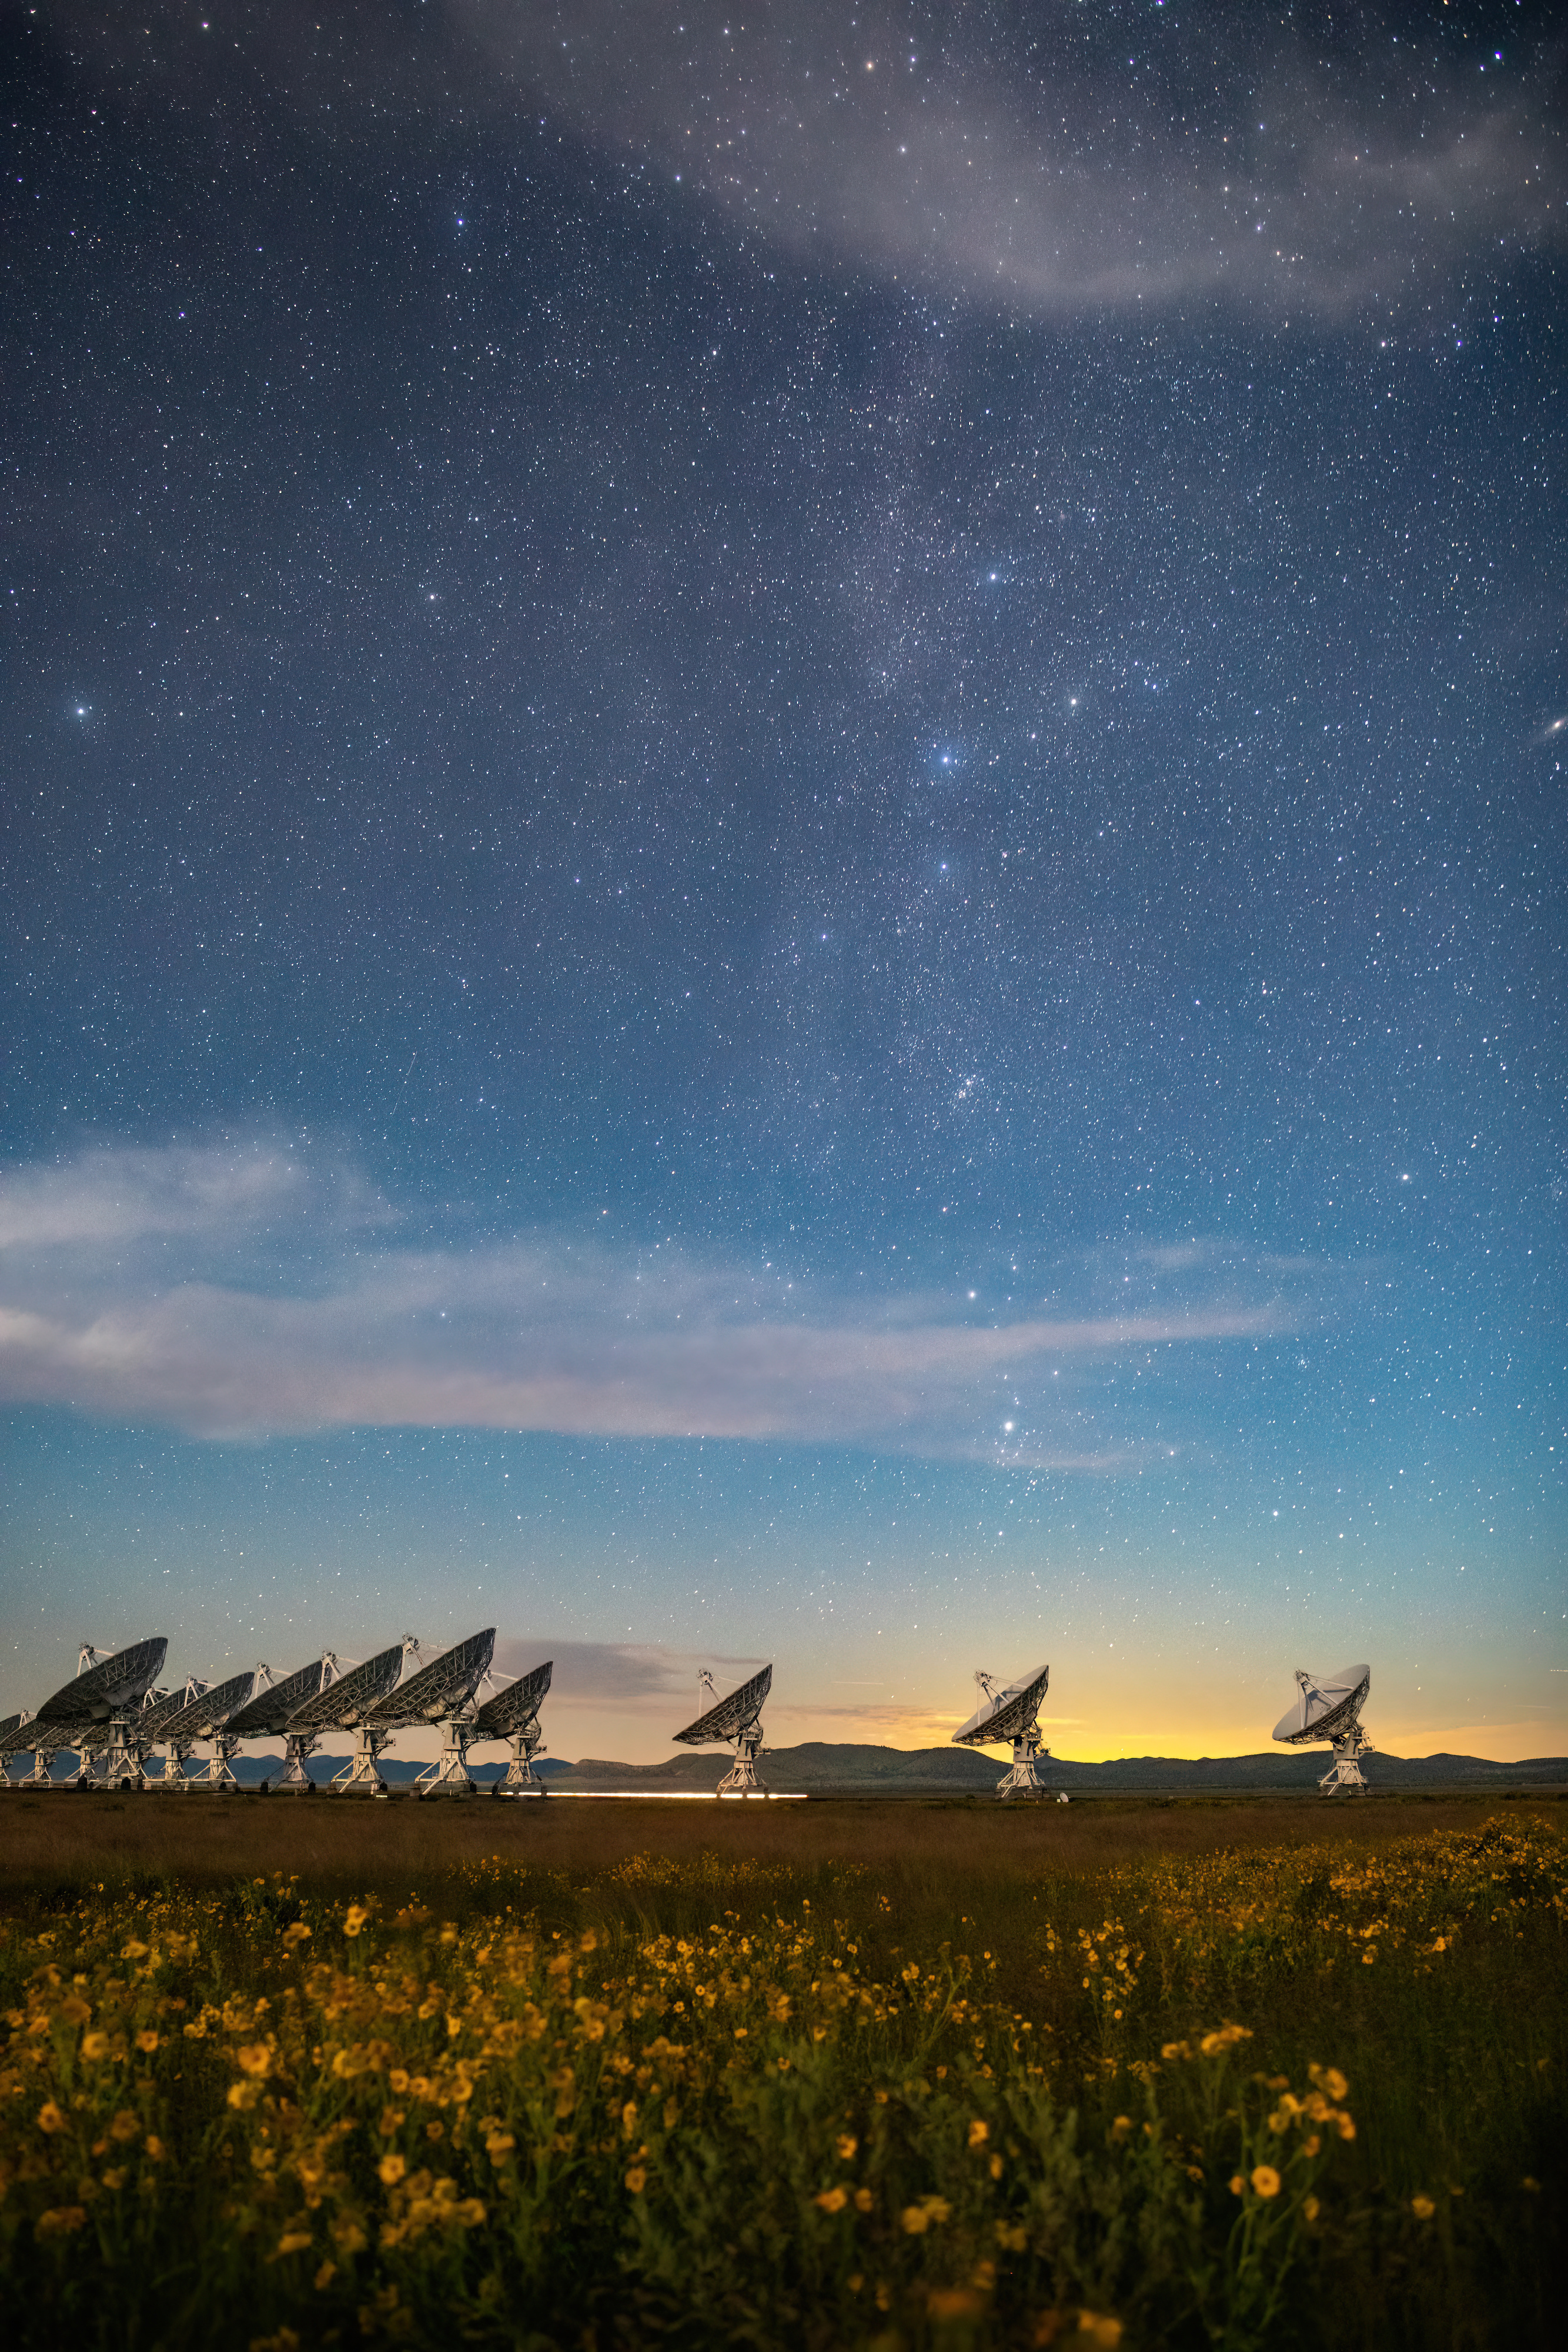 VLA Dishes: Cassiopeia and Flowers